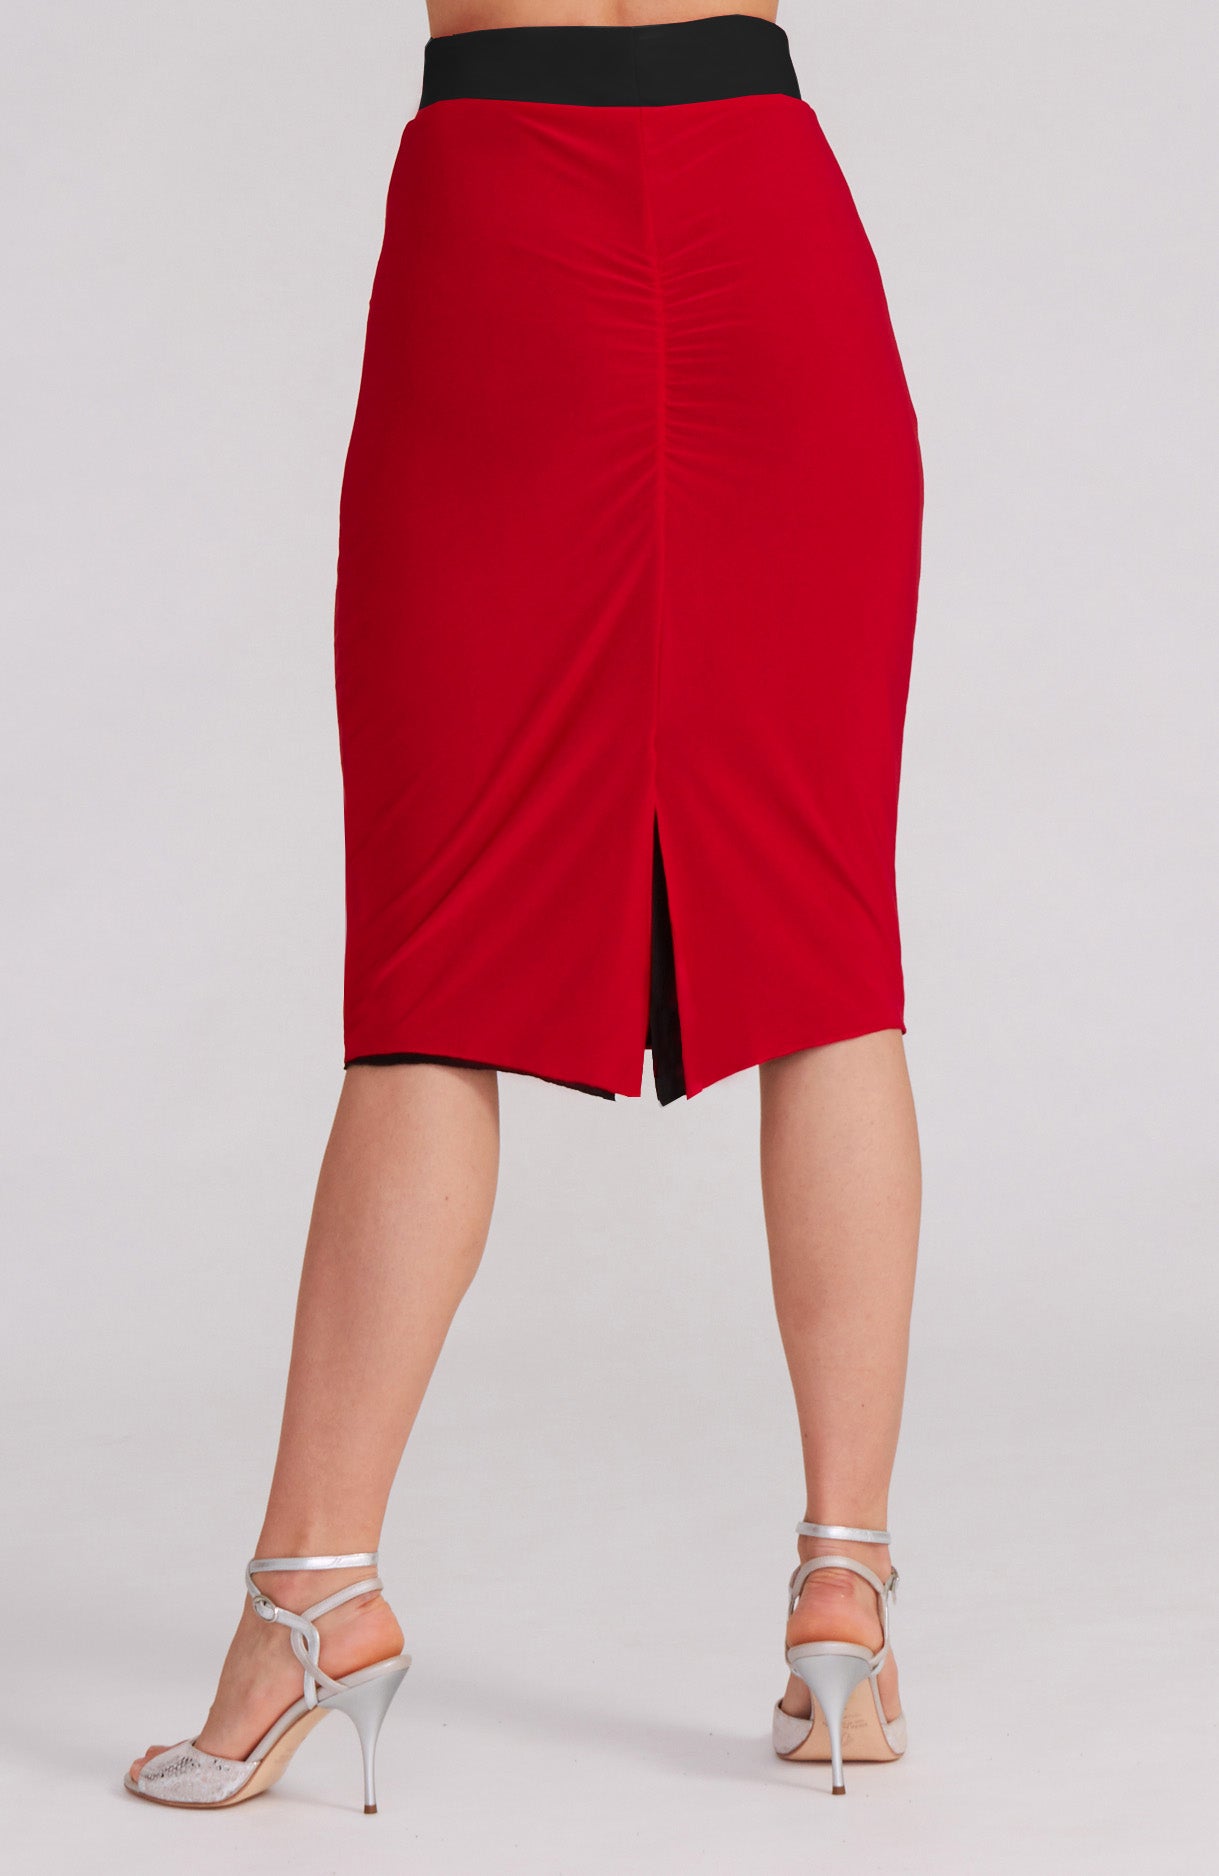 tango skirt in red and black